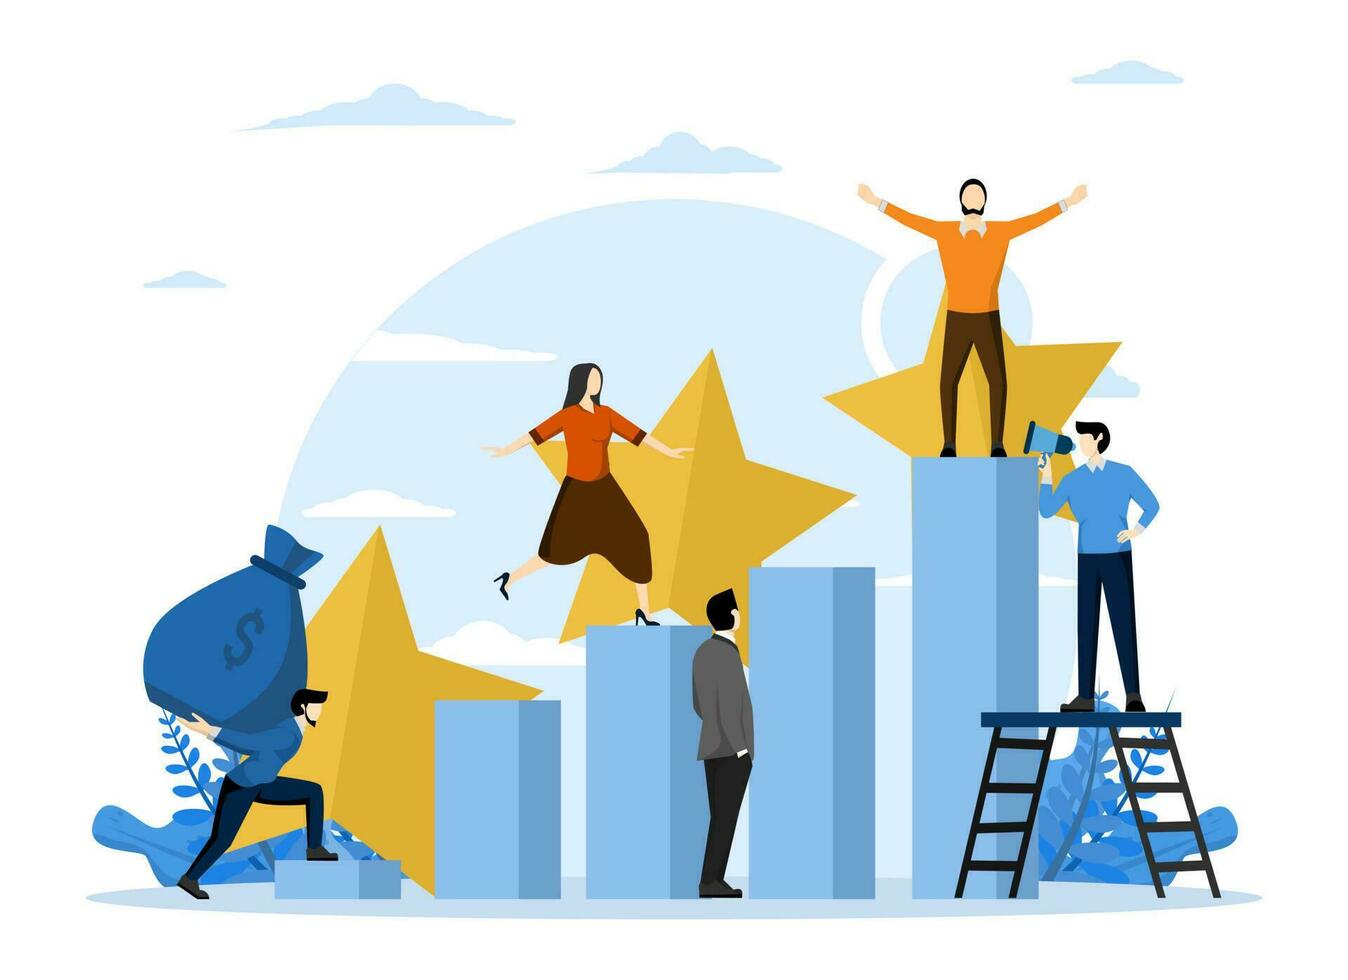 Business concept vector illustration, little people climbing corporate ladder, path to achieve target, preparing to launch business project. career for success, career growth concept, career planning.